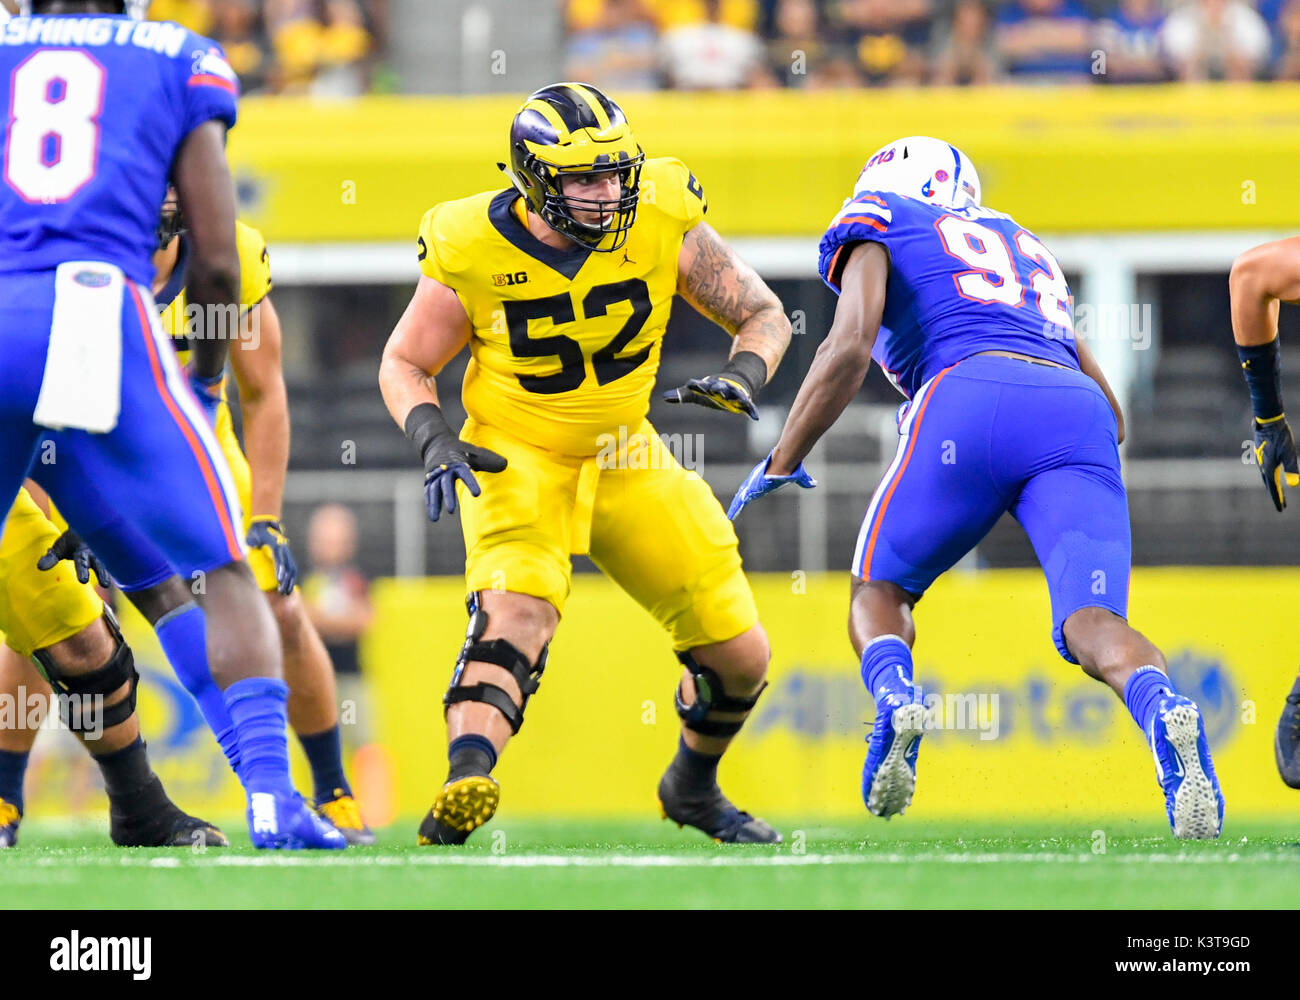 September 02, 2017: Michigan Wolverines offensive lineman Mason Cole #52 during the Advocare Classic NCAA Football game between the University of Michigan Wolverines and the University of Florida Gators at AT&T Stadium in Arlington, TX Michigan defeated Florida 33-17 Albert Pena/CSM Stock Photo